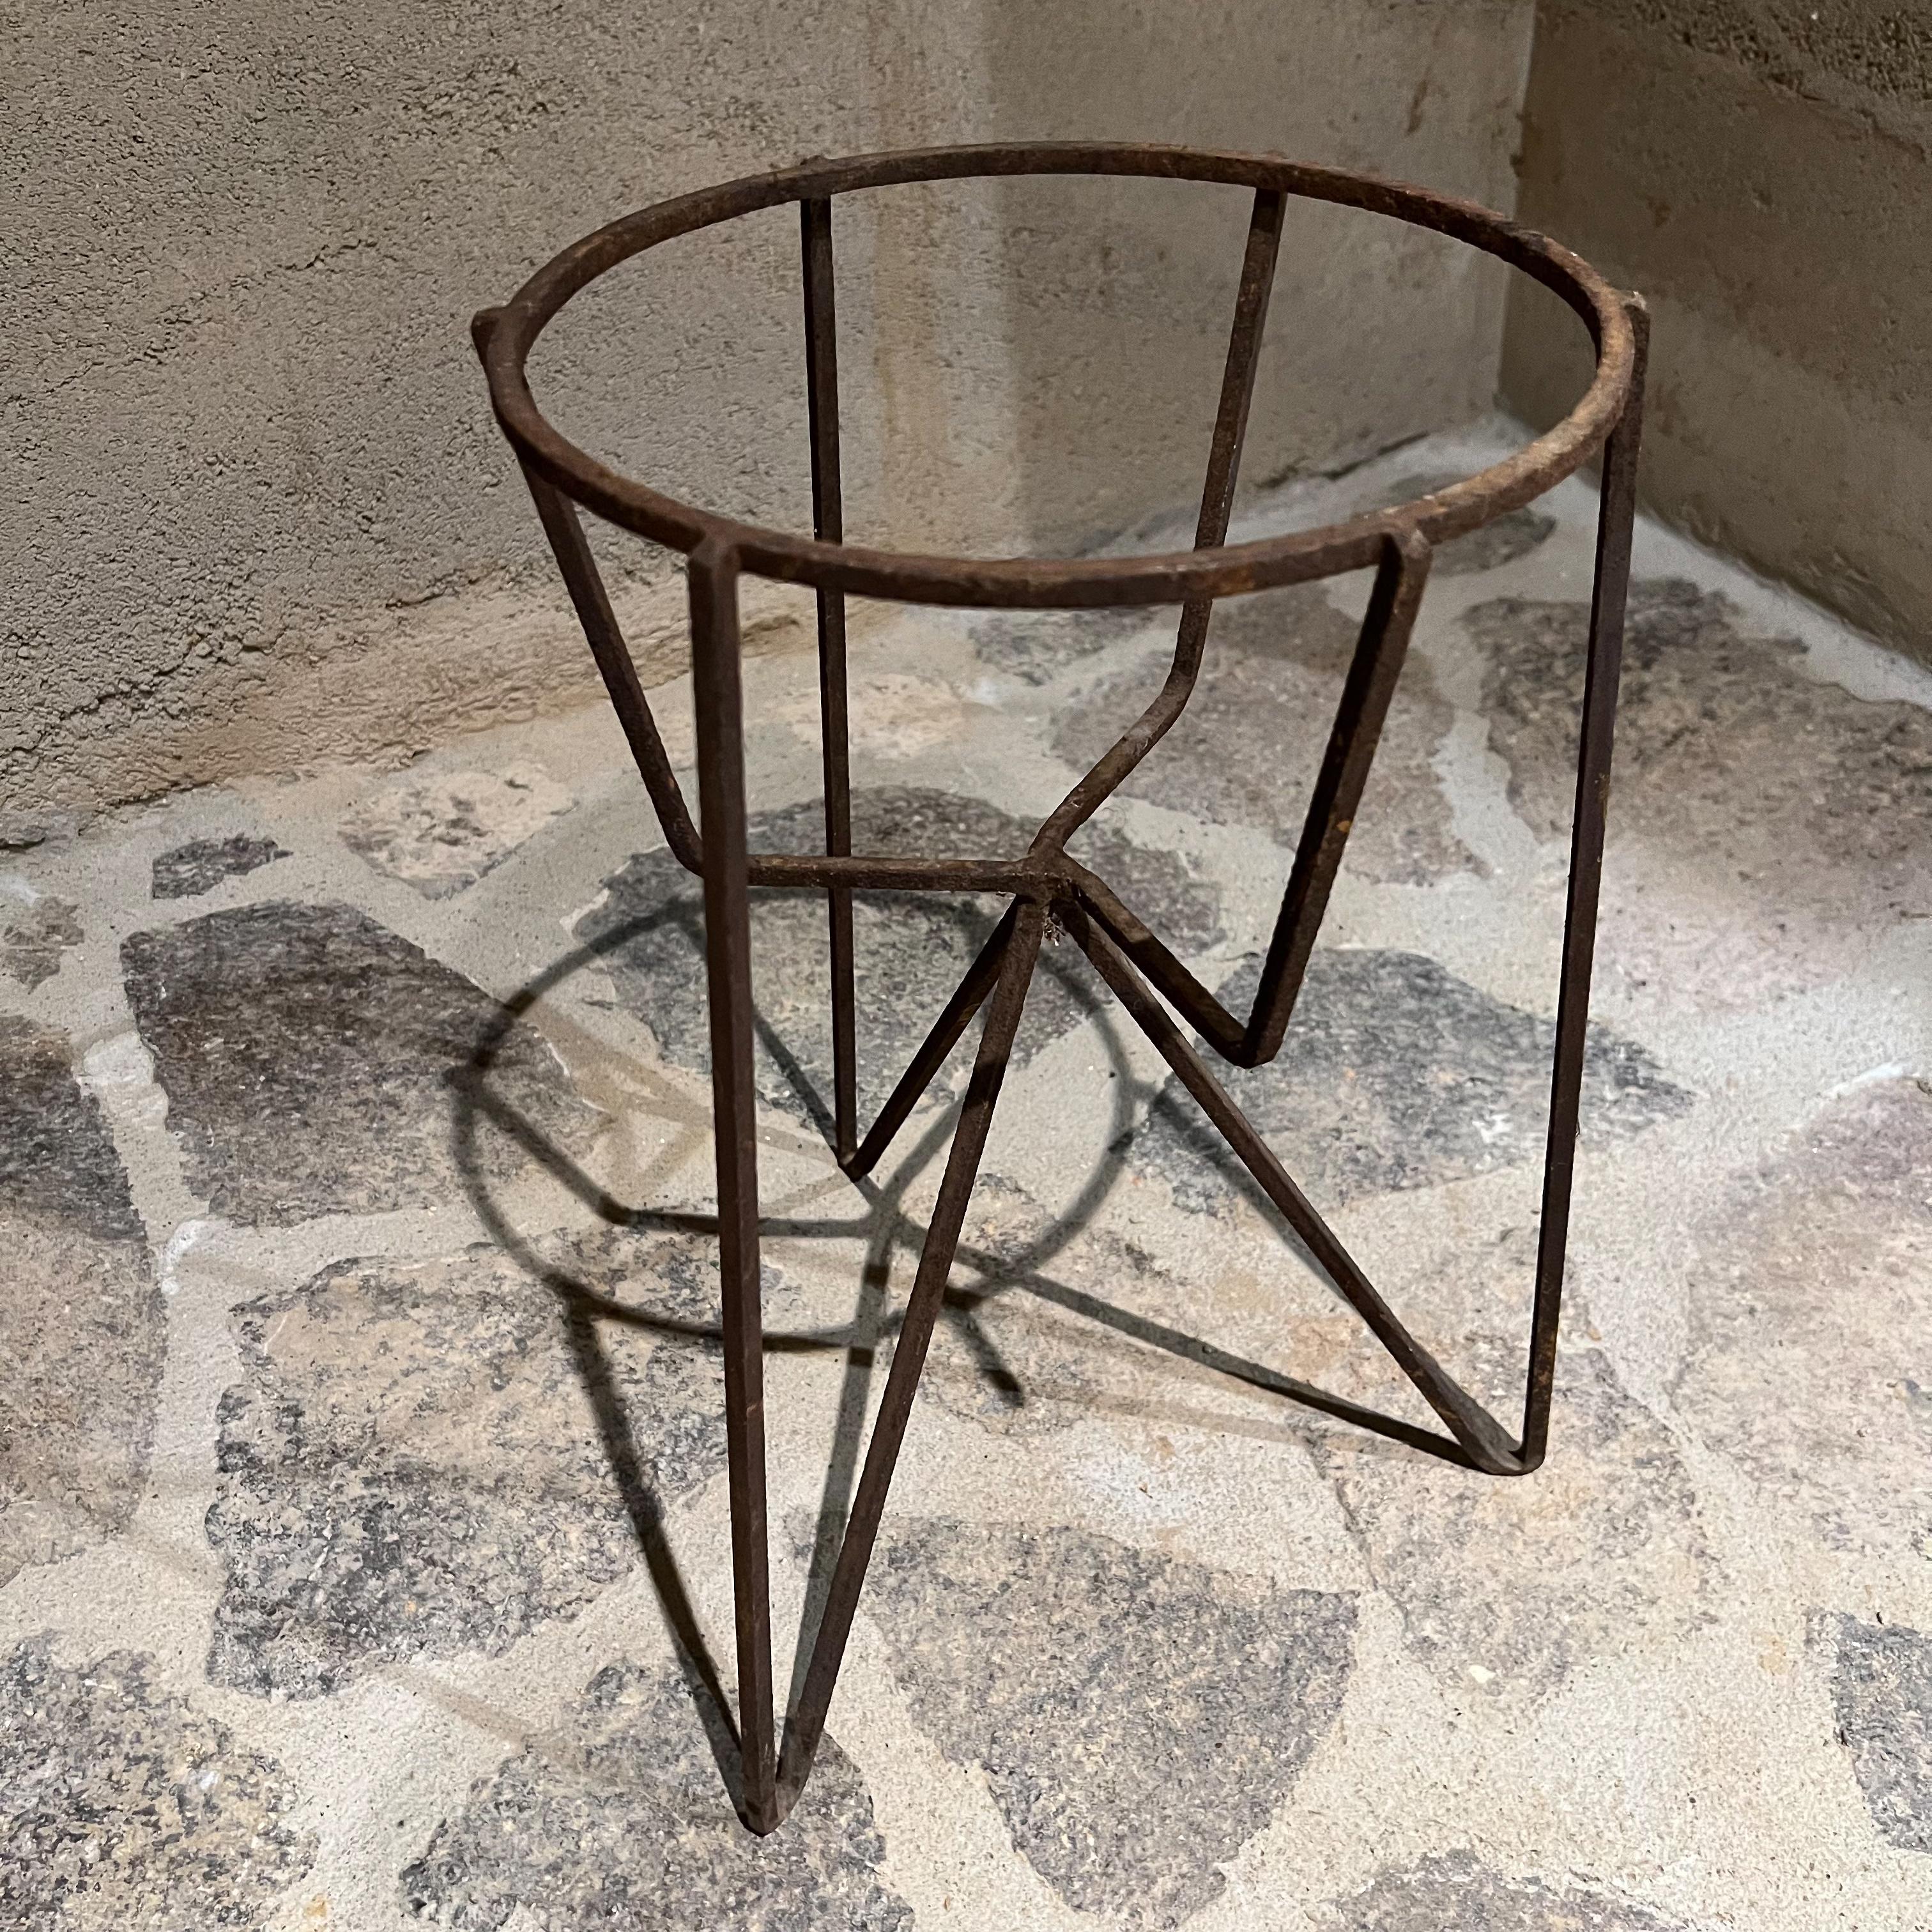 1950s Sculptural Iron Round Metal Tripod Planter Pedestal Vintage Modern Stand In Distressed Condition For Sale In Chula Vista, CA